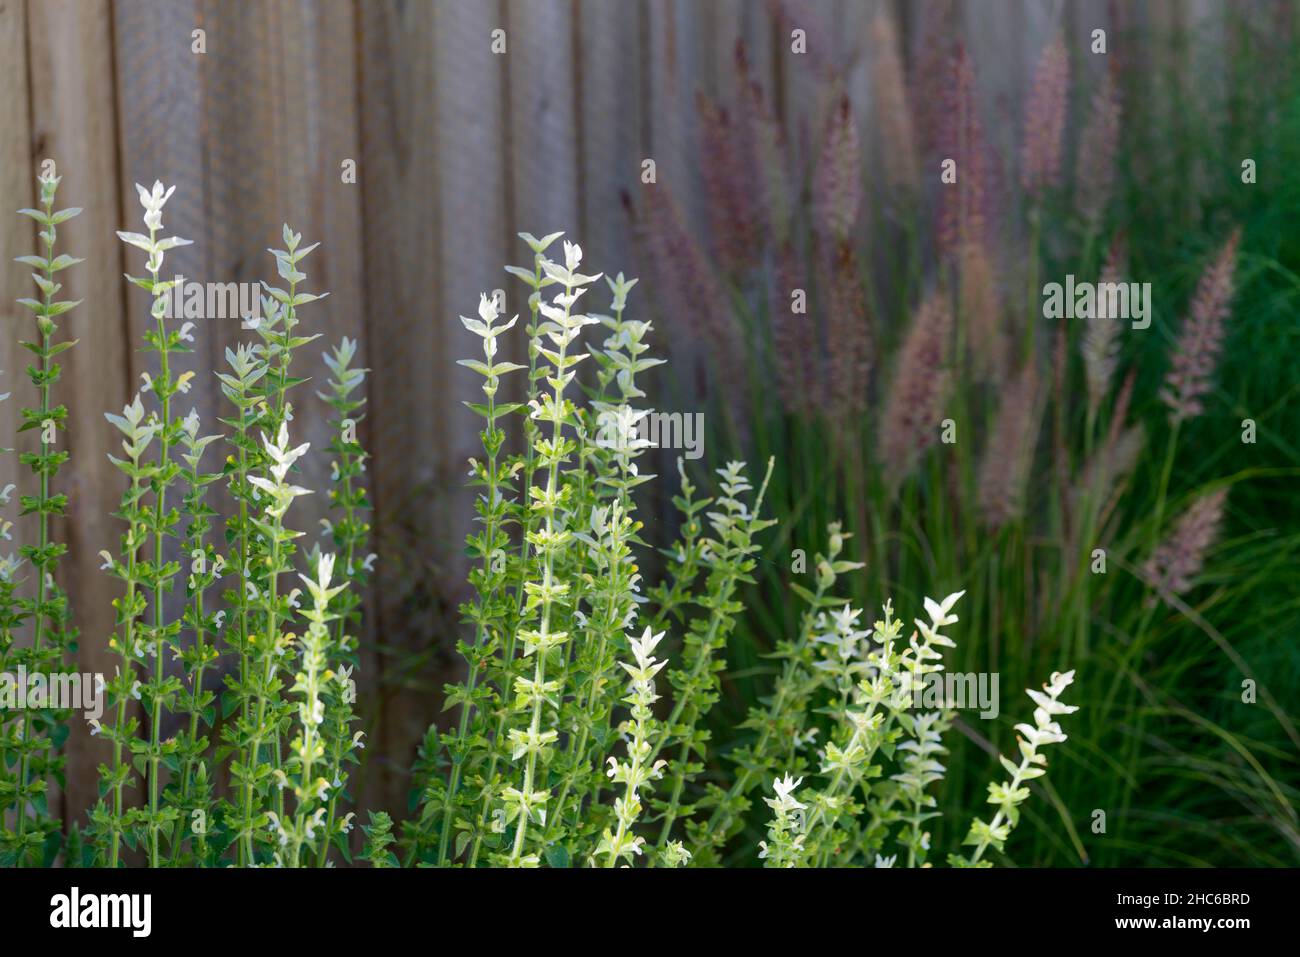 Clary sage plant (Salvia sclarea) growing in a backyard garden in Sydney, New South Wales, Australia Stock Photo